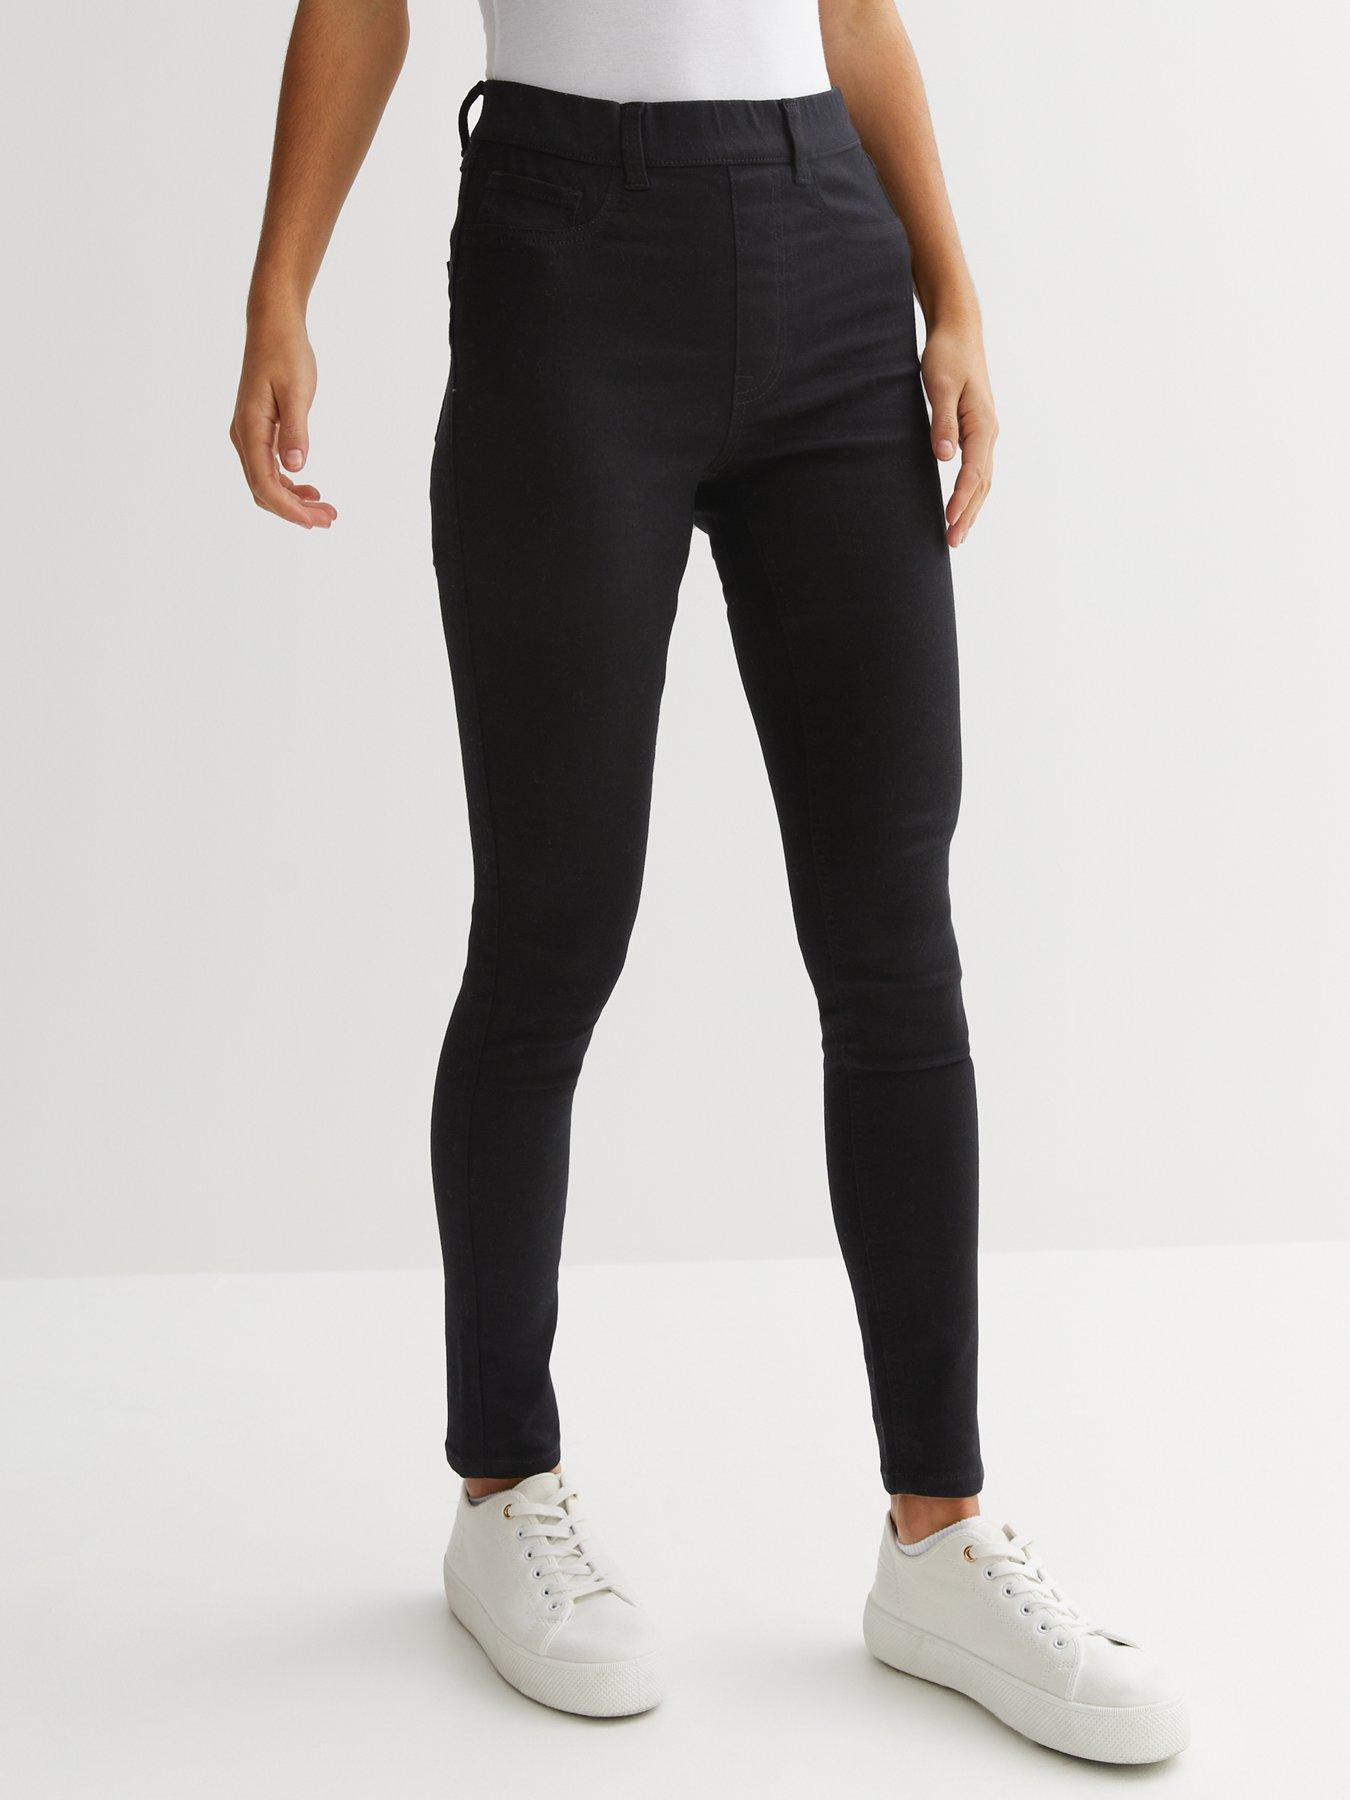 New Look Curves Black Coated Leather-Look Mid Rise Lift & Shape Emilee  Jeggings, £18.50